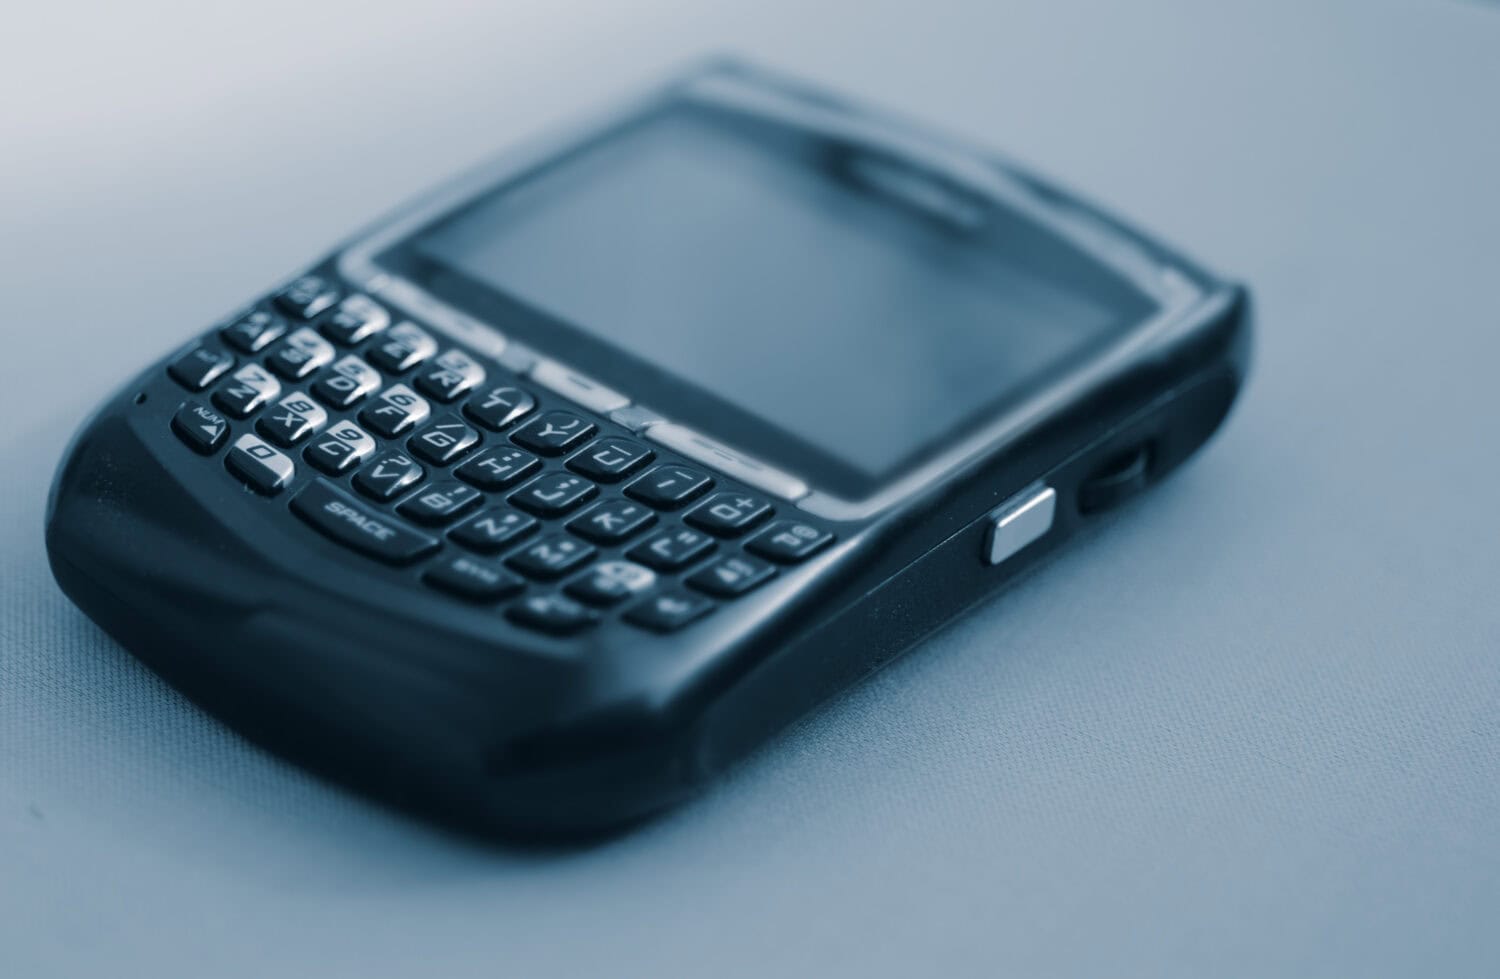 Blackberry - Personal Communication Device - Email